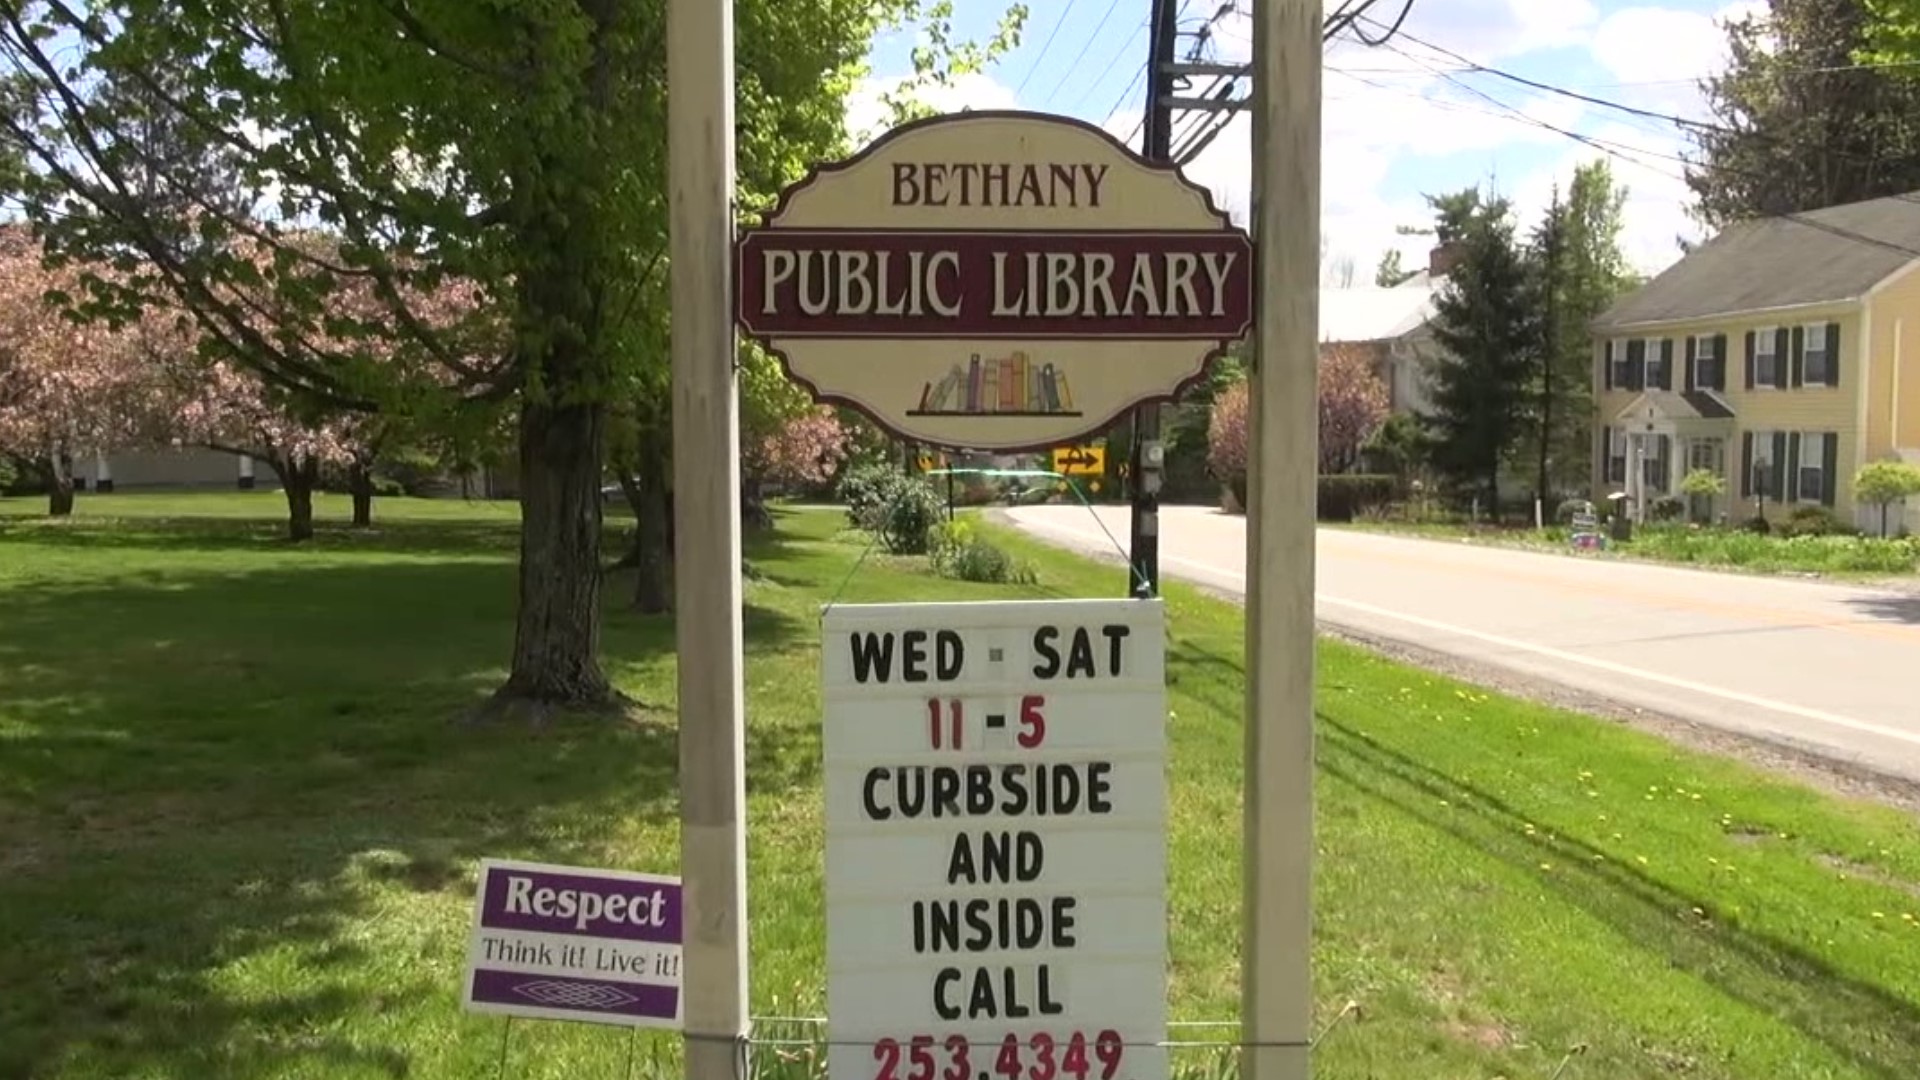 The Bethany Public Library is encouraging people to help raise funds while exploring northern Wayne County by going on a scavenger hunt